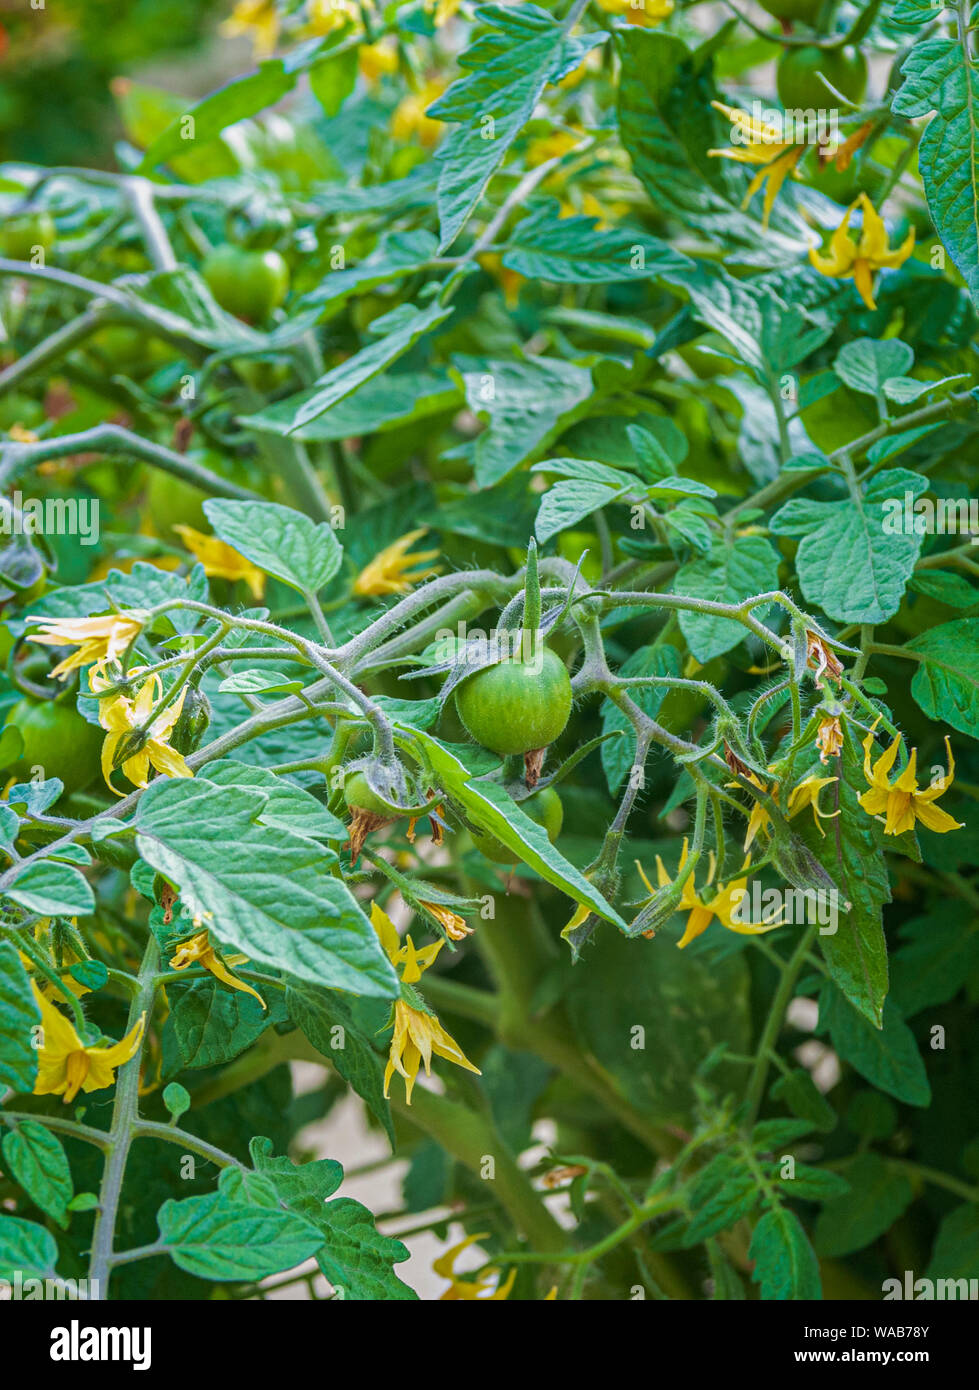 Tomatoes, Tumbling Toms (Solanum lycopersicum Tumbling Tom) growing in a hanging basket in a kitchen garden Stock Photo